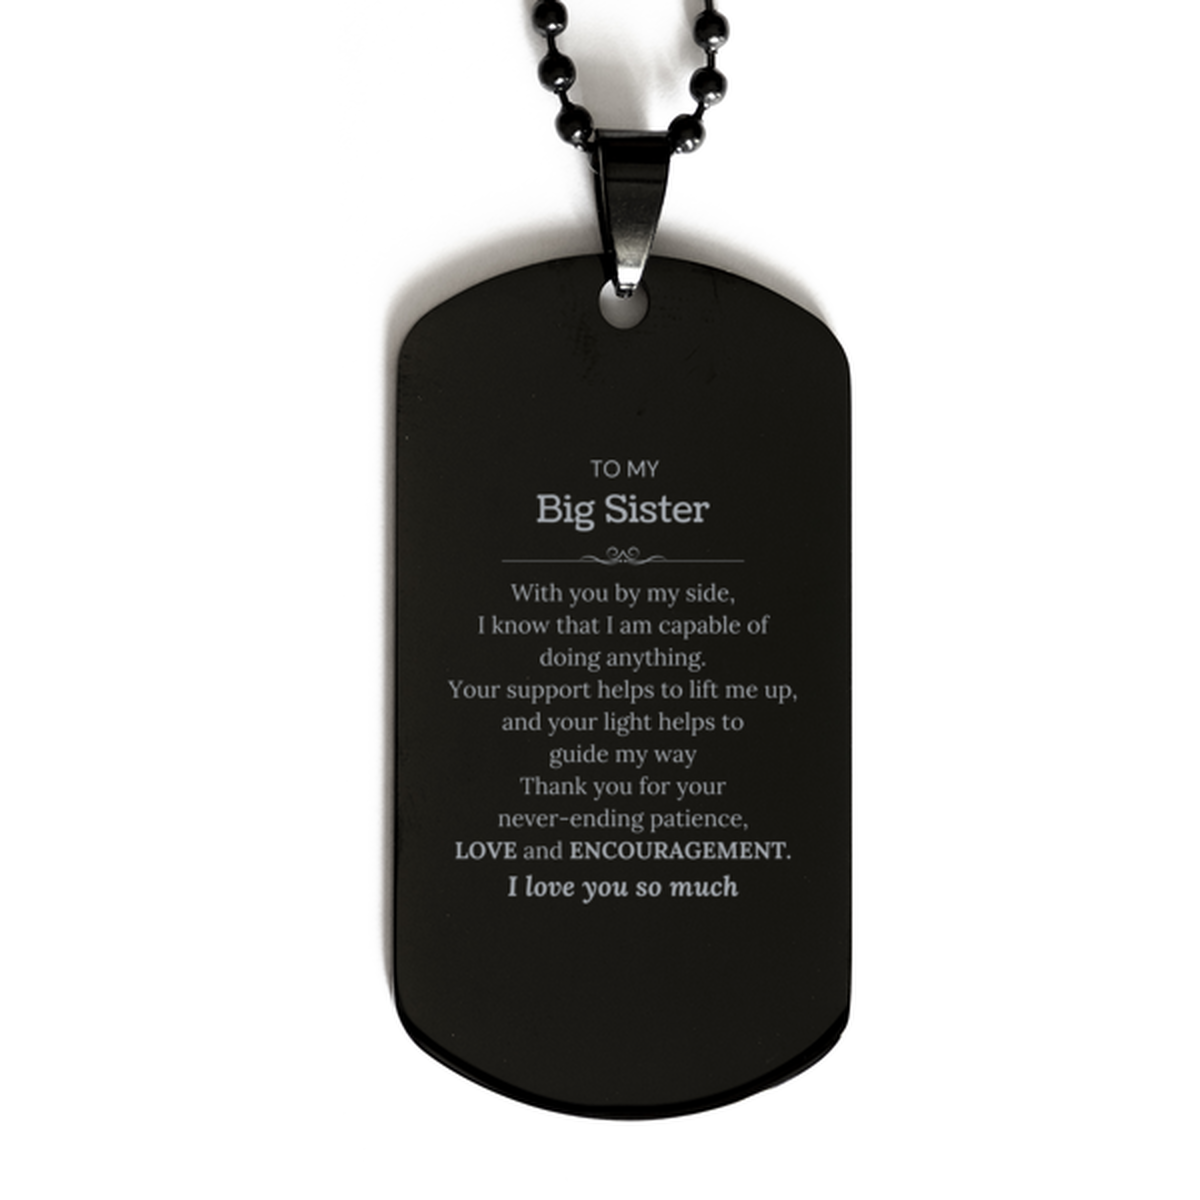 Appreciation Big Sister Black Dog Tag Gifts, To My Big Sister Birthday Christmas Wedding Keepsake Gifts for Big Sister With you by my side, I know that I am capable of doing anything. I love you so much